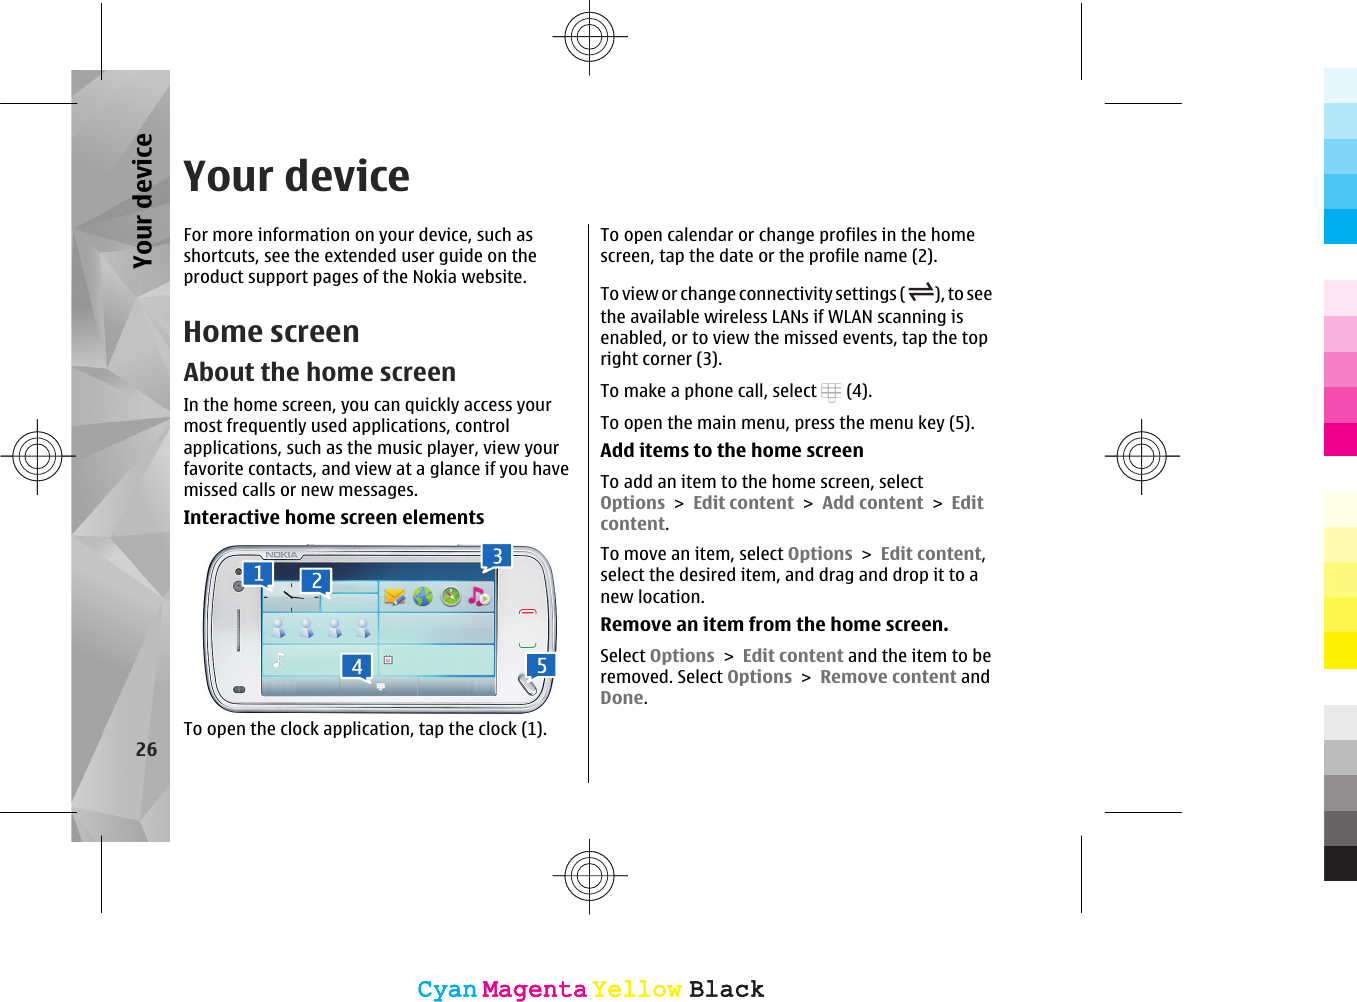 Your deviceFor more information on your device, such asshortcuts, see the extended user guide on theproduct support pages of the Nokia website.Home screenAbout the home screenIn the home screen, you can quickly access yourmost frequently used applications, controlapplications, such as the music player, view yourfavorite contacts, and view at a glance if you havemissed calls or new messages.Interactive home screen elementsTo open the clock application, tap the clock (1).To open calendar or change profiles in the homescreen, tap the date or the profile name (2).To view or change connectivity settings ( ), to seethe available wireless LANs if WLAN scanning isenabled, or to view the missed events, tap the topright corner (3).To make a phone call, select   (4).To open the main menu, press the menu key (5).Add items to the home screenTo add an item to the home screen, selectOptions &gt; Edit content &gt; Add content &gt; Editcontent.To move an item, select Options &gt; Edit content,select the desired item, and drag and drop it to anew location.Remove an item from the home screen.Select Options &gt; Edit content and the item to beremoved. Select Options &gt; Remove content andDone.26Your deviceCyanCyanMagentaMagentaYellowYellowBlackBlackCyanCyanMagentaMagentaYellowYellowBlackBlack